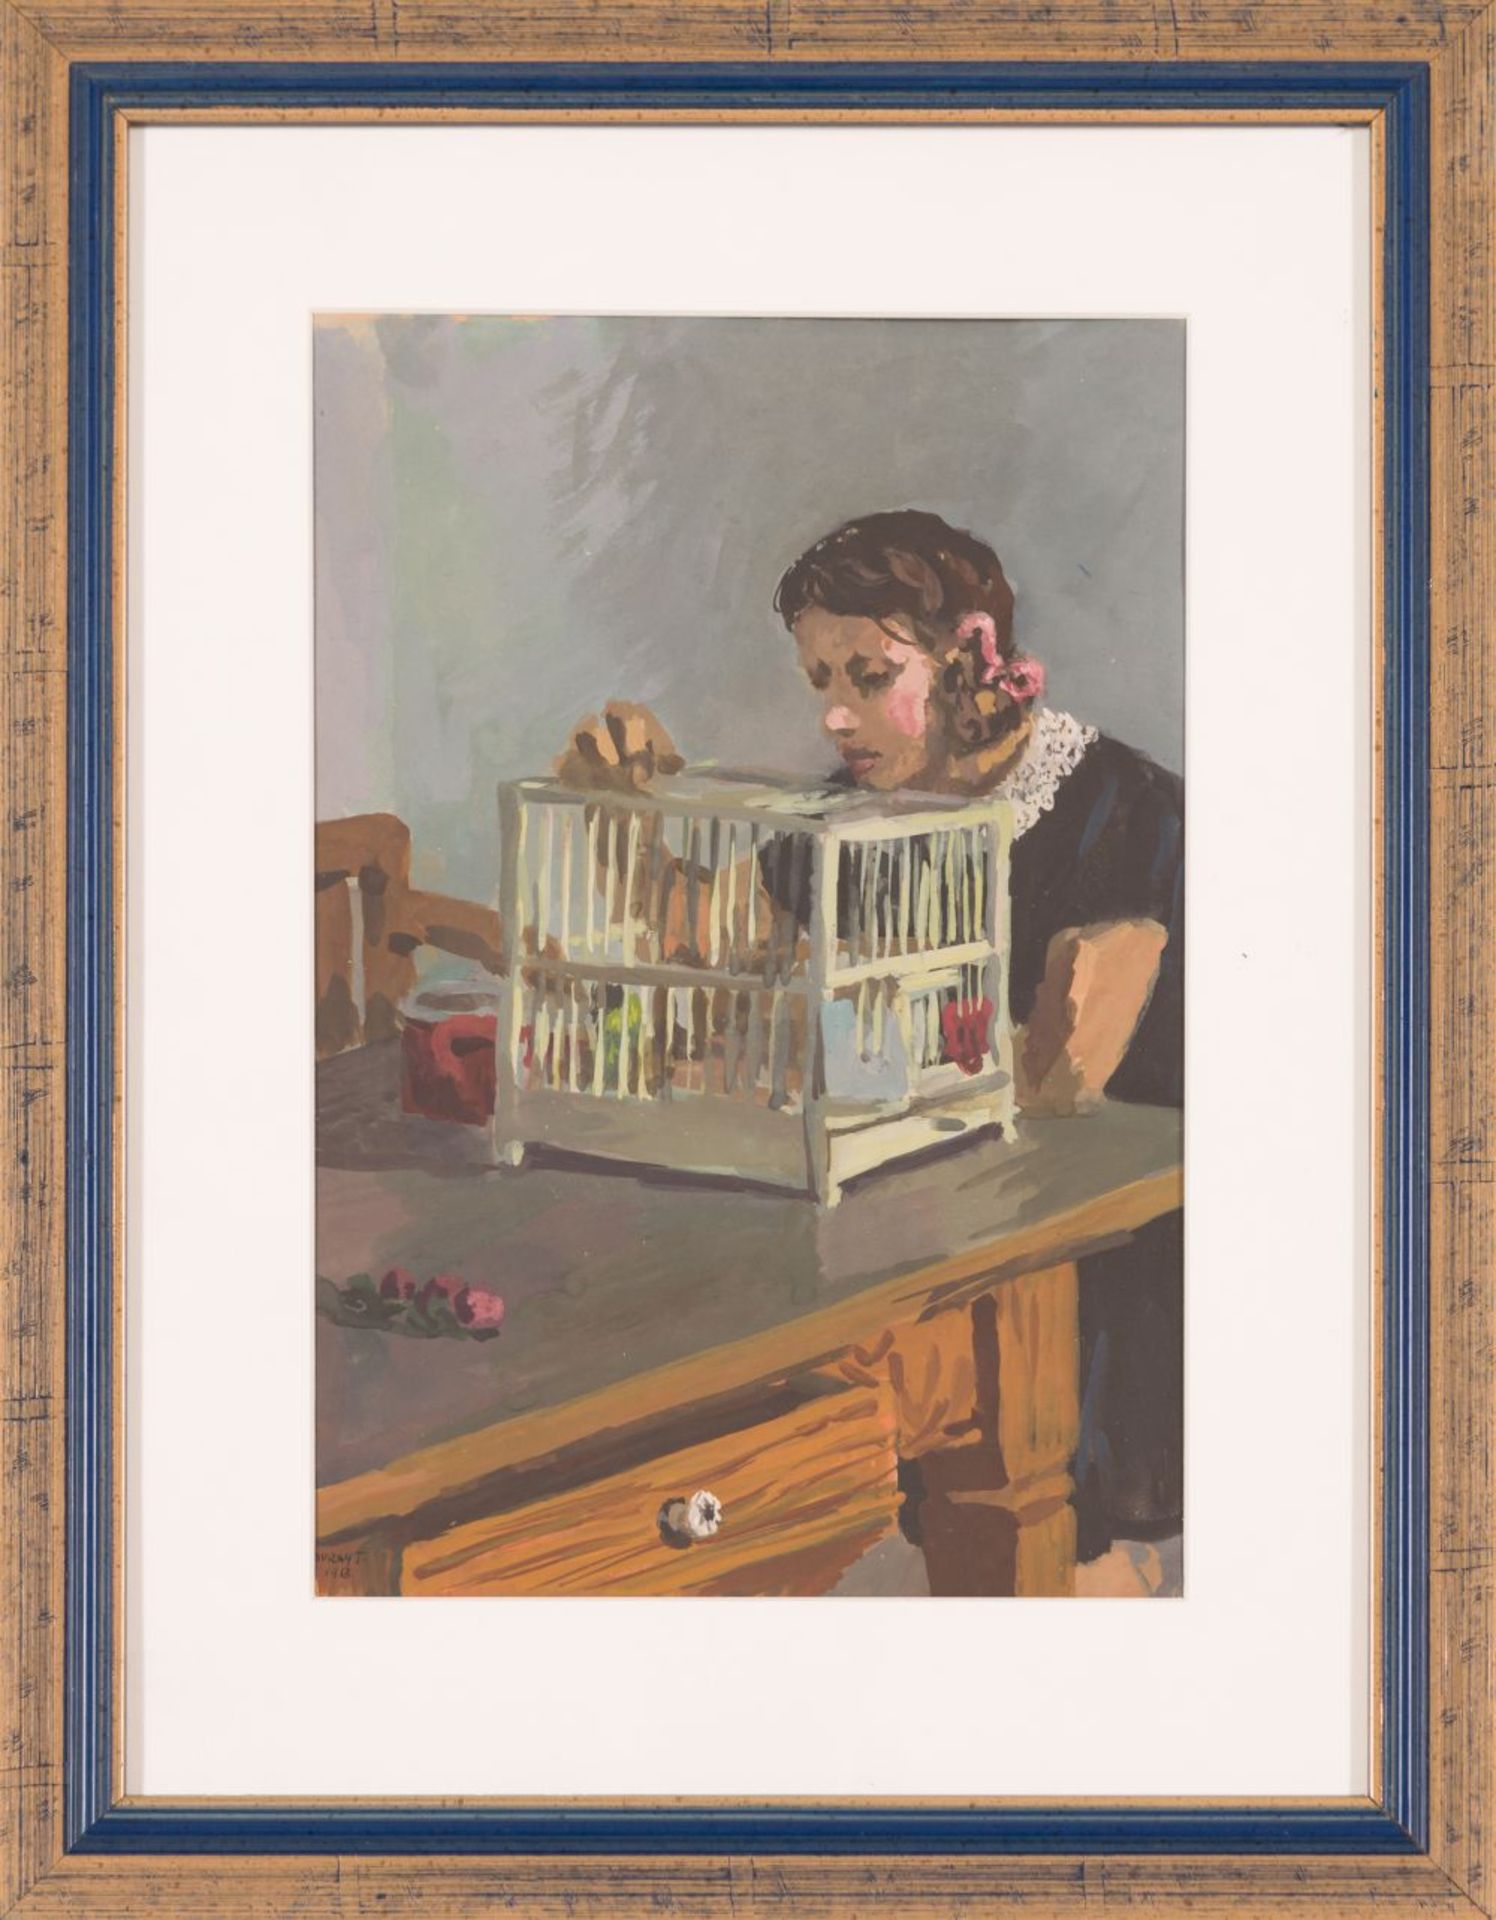 Girl with a Cage, 1953 Gouache on paper Signed and dated lower left 11,9 x 8,3 in Lent frame - Image 2 of 4